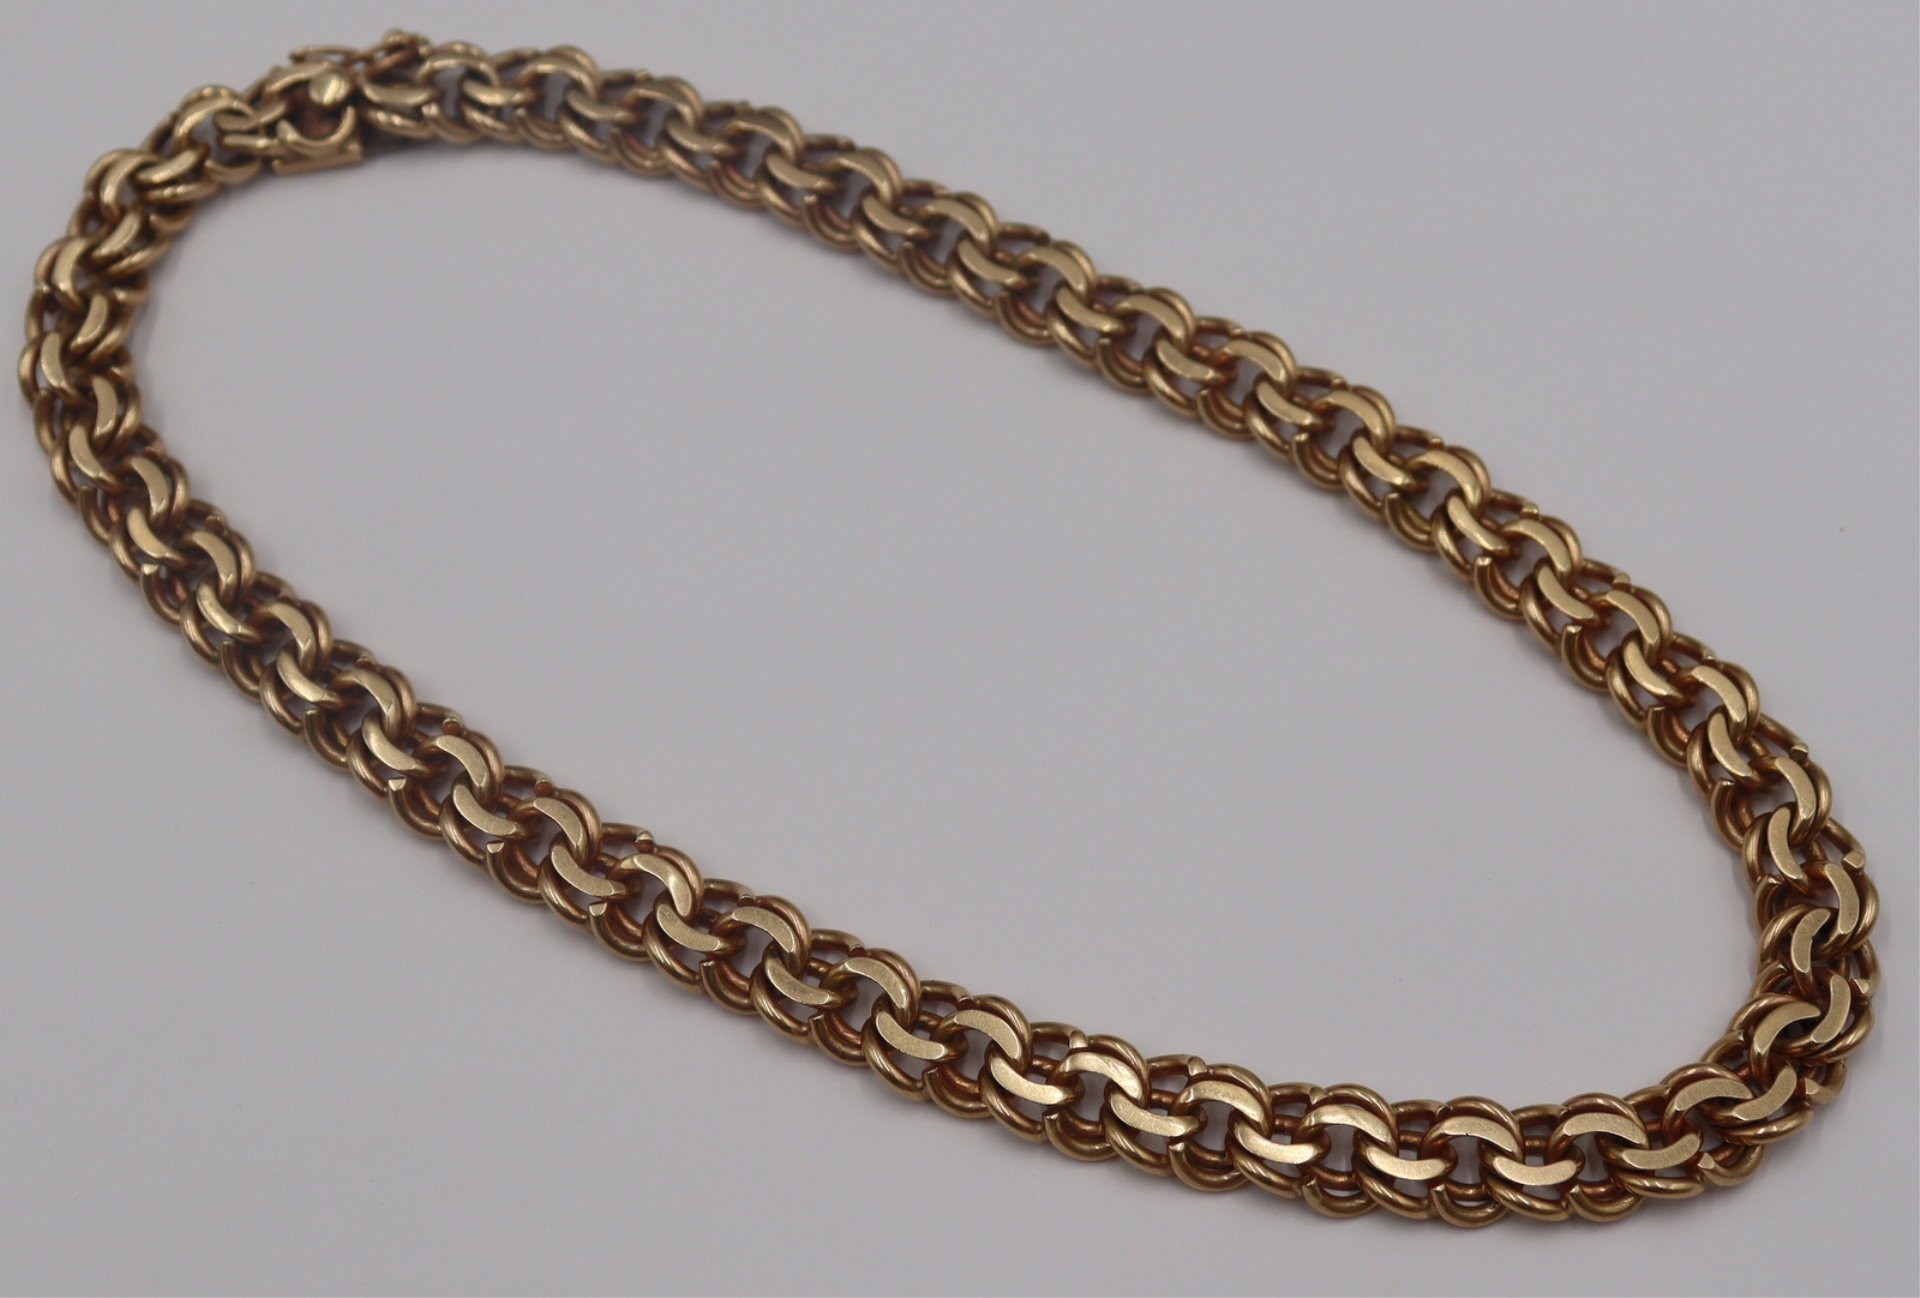 JEWELRY 14KT GOLD CHAIN LINK NECKLACE  3bc583